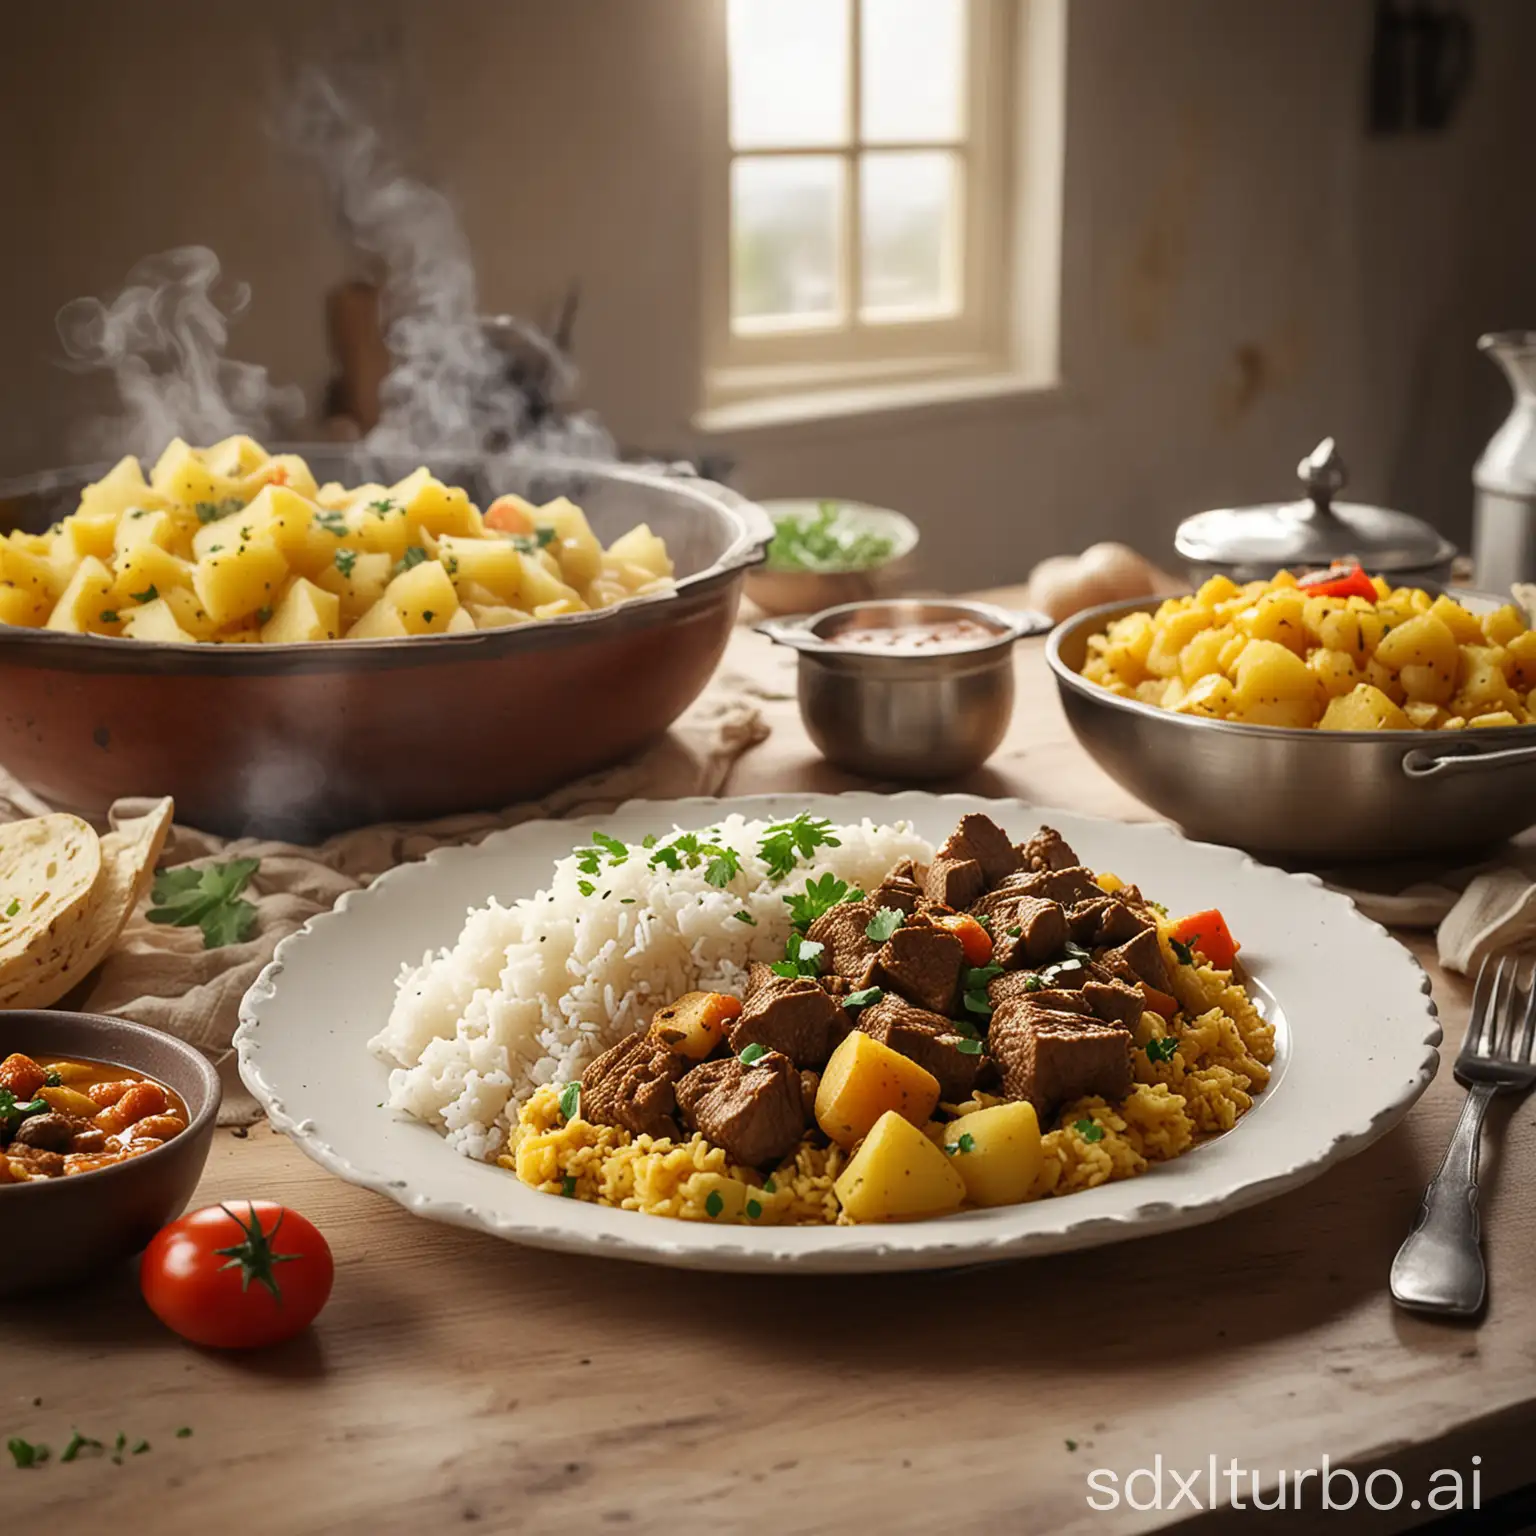 Savory-Beef-Potato-Curry-and-Rice-A-Mouthwatering-Delight-in-a-Vibrant-Kitchen-Setting